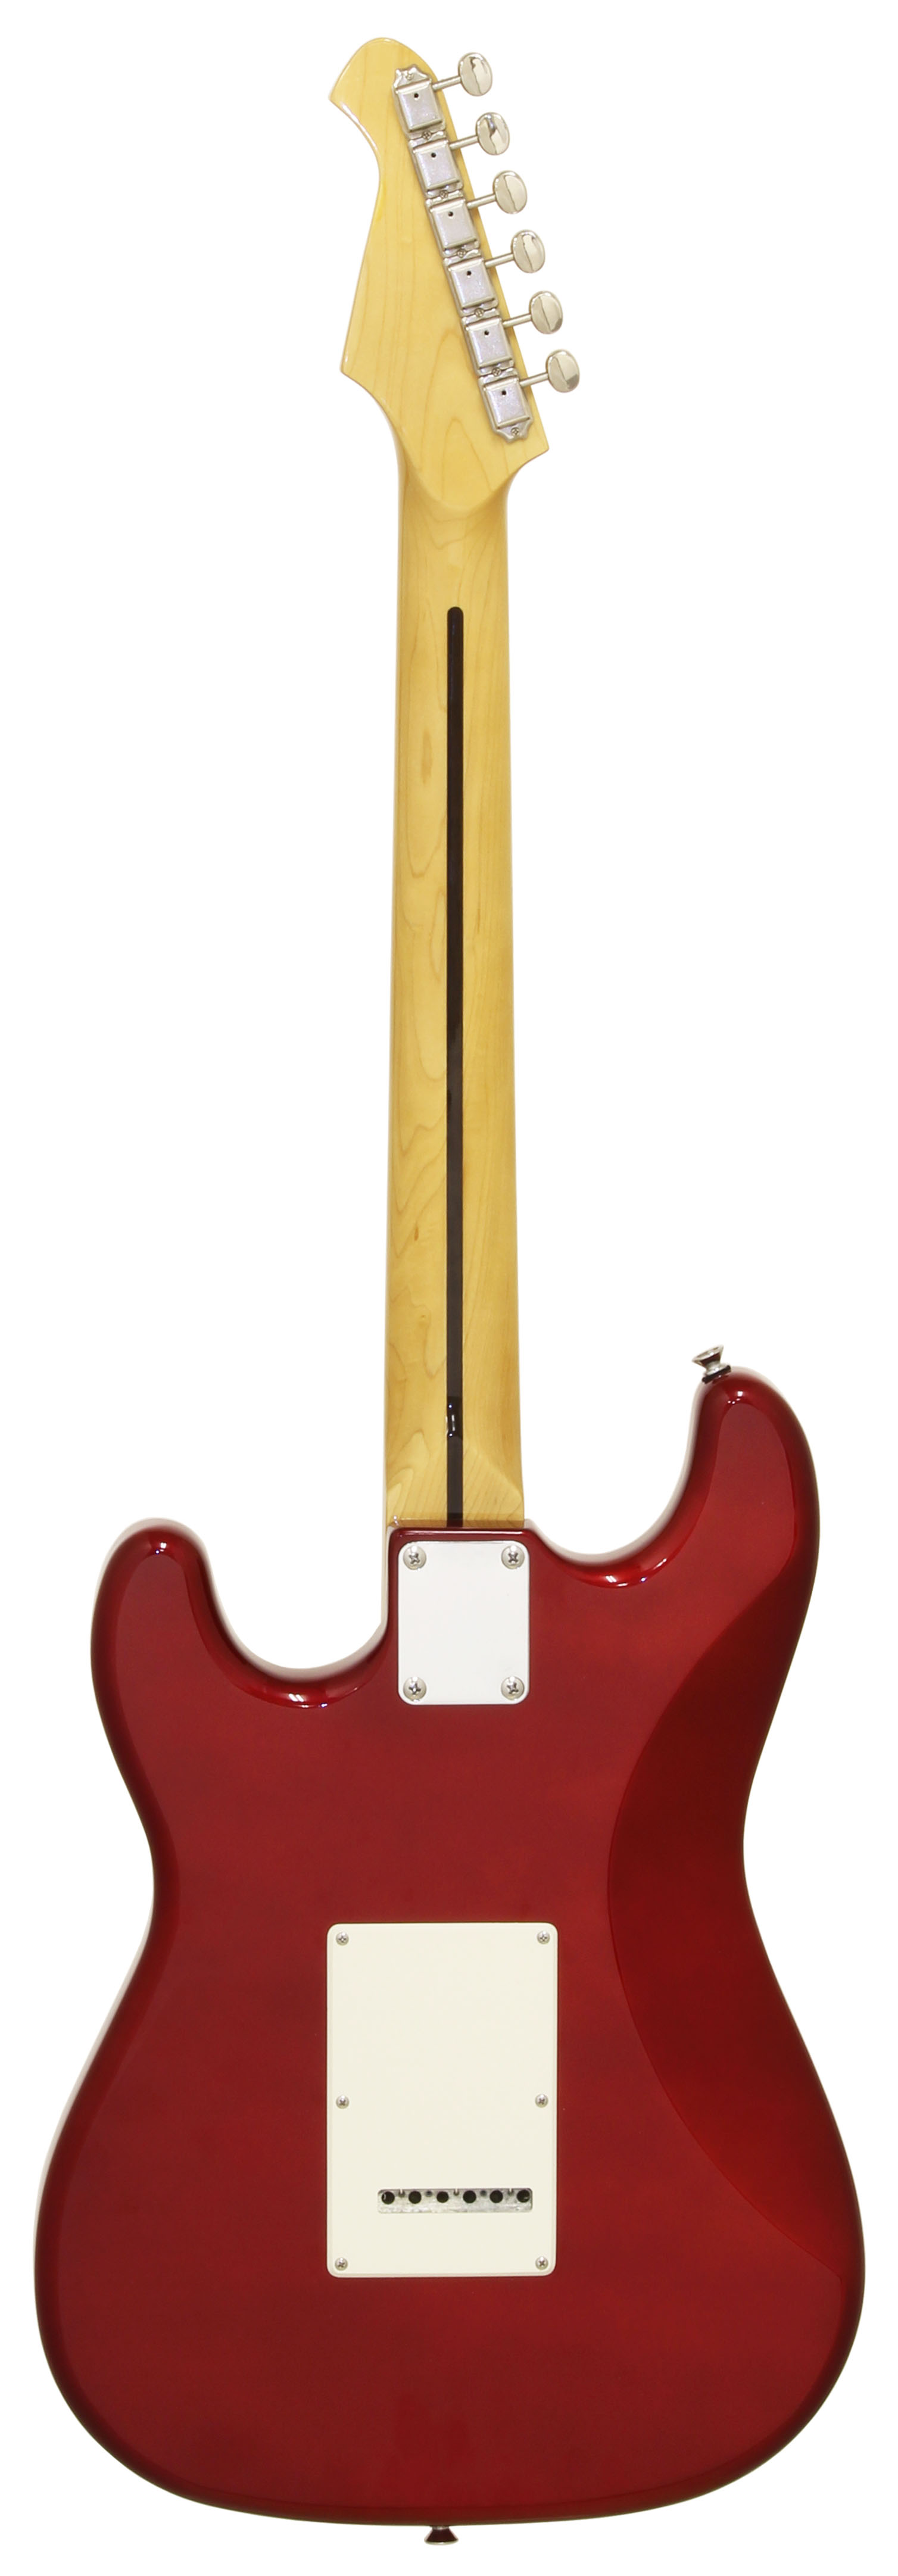 Aria STG 57, candy apple red